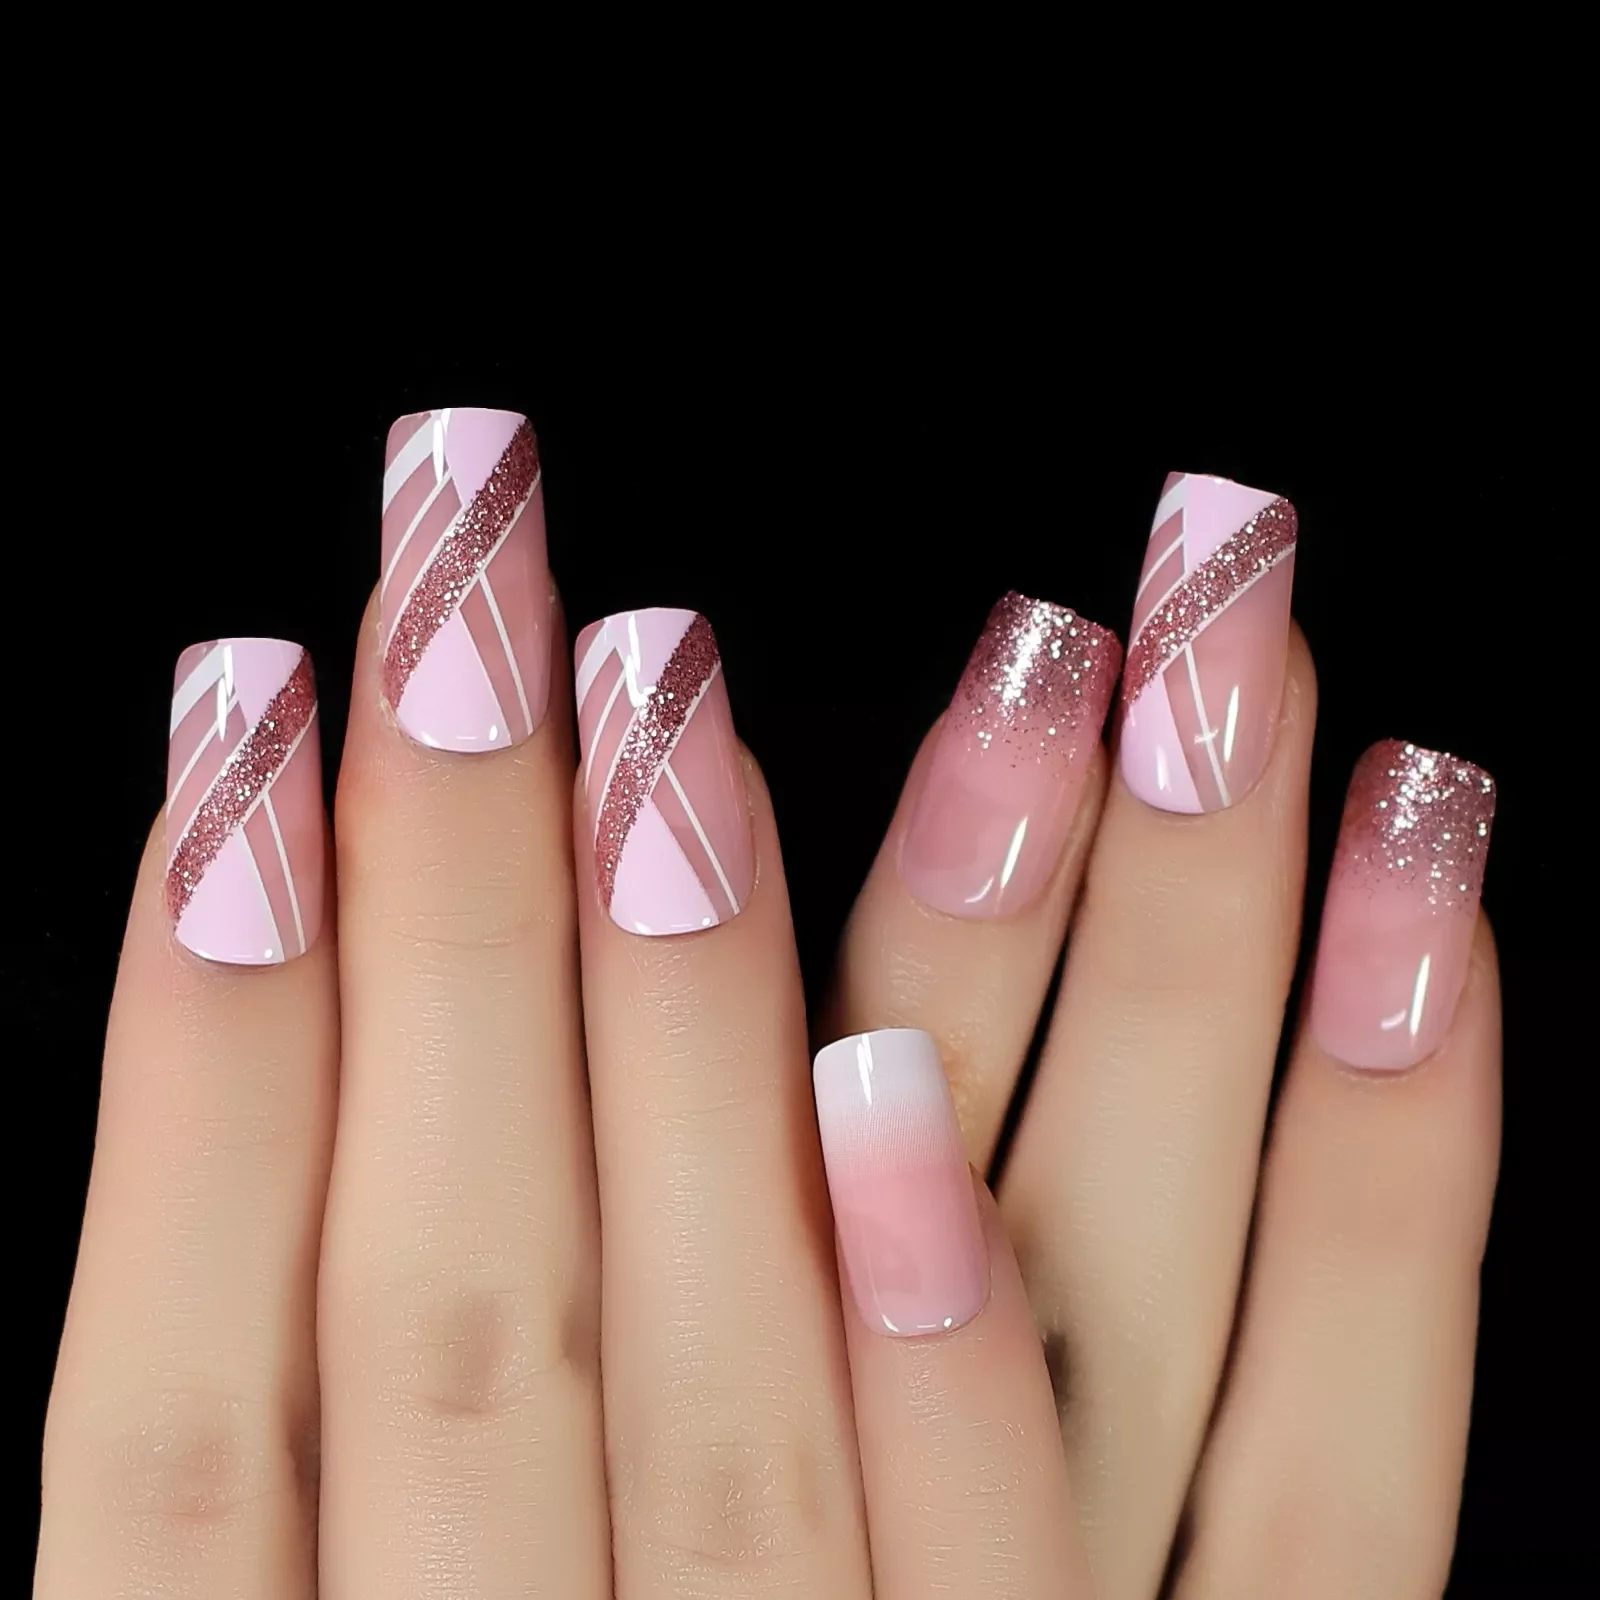 

Square Glitter Nails Art Fingernails Manicure Press On Fake Nails With Designed Pink Line Acrylic Full Cover Tips